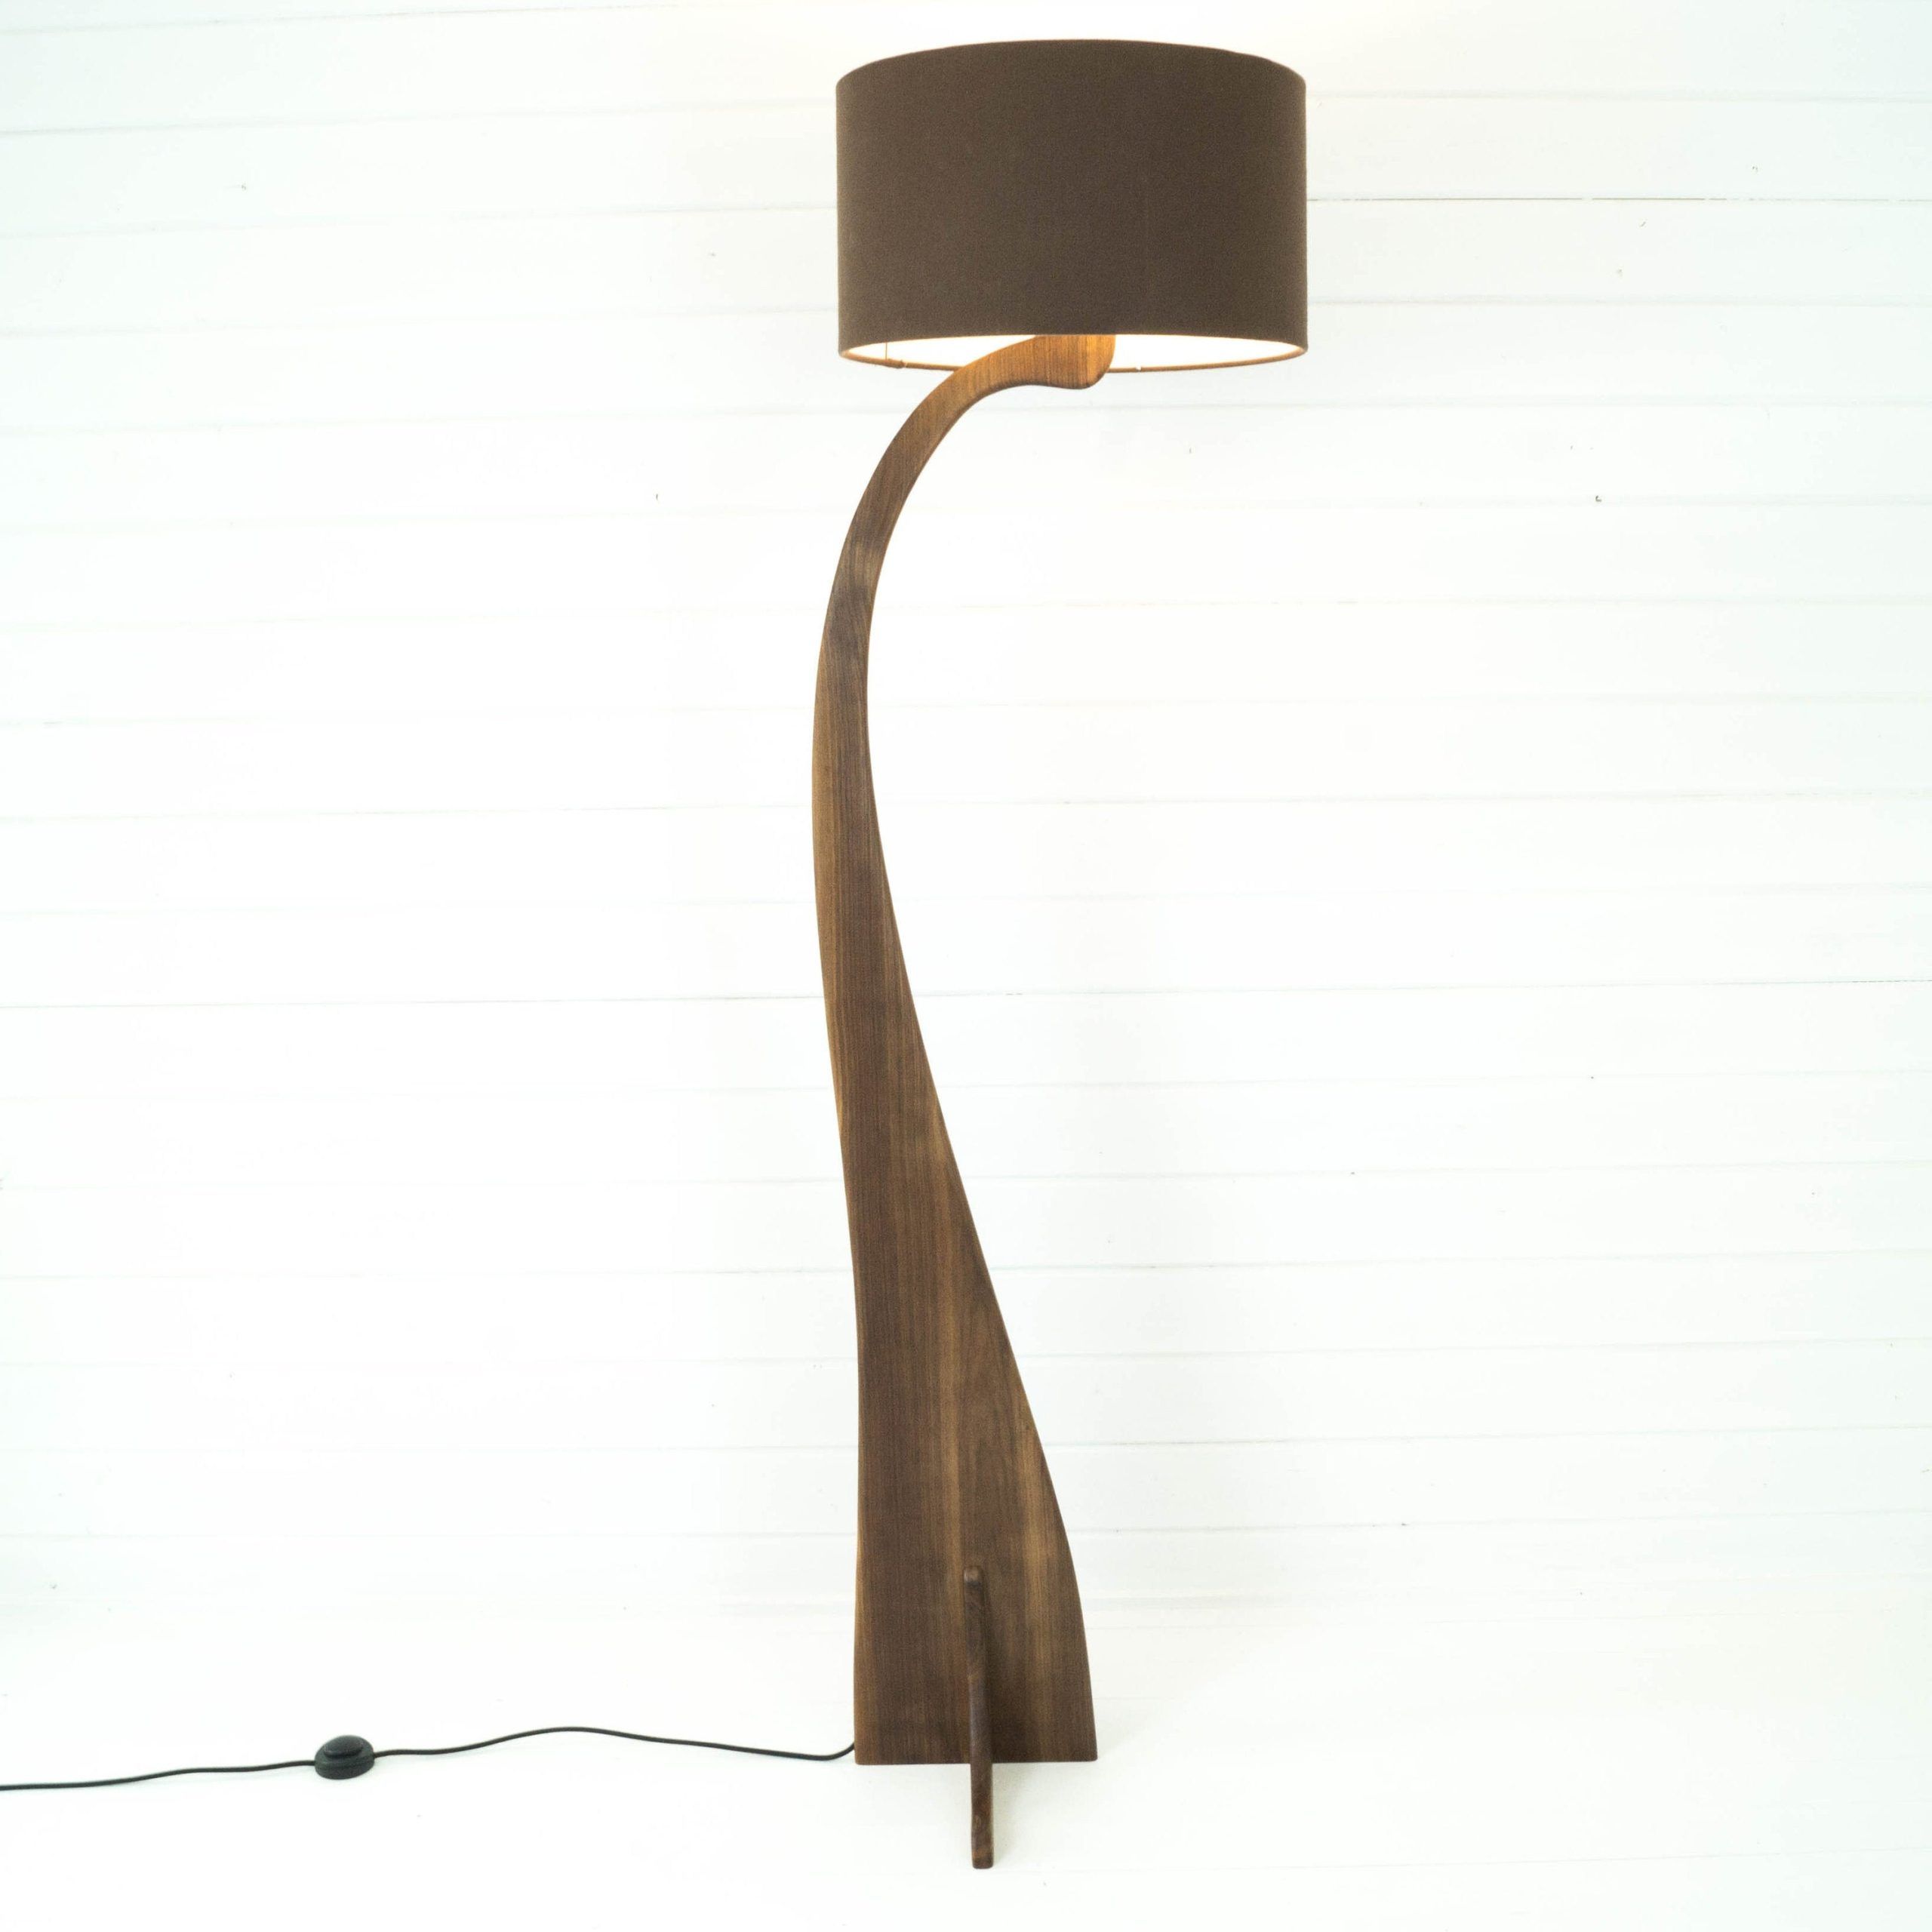 Walnut Floor Lamp Solid Wood Unique Contemporary Design – Etsy Uk Intended For Walnut Floor Lamps (View 3 of 20)